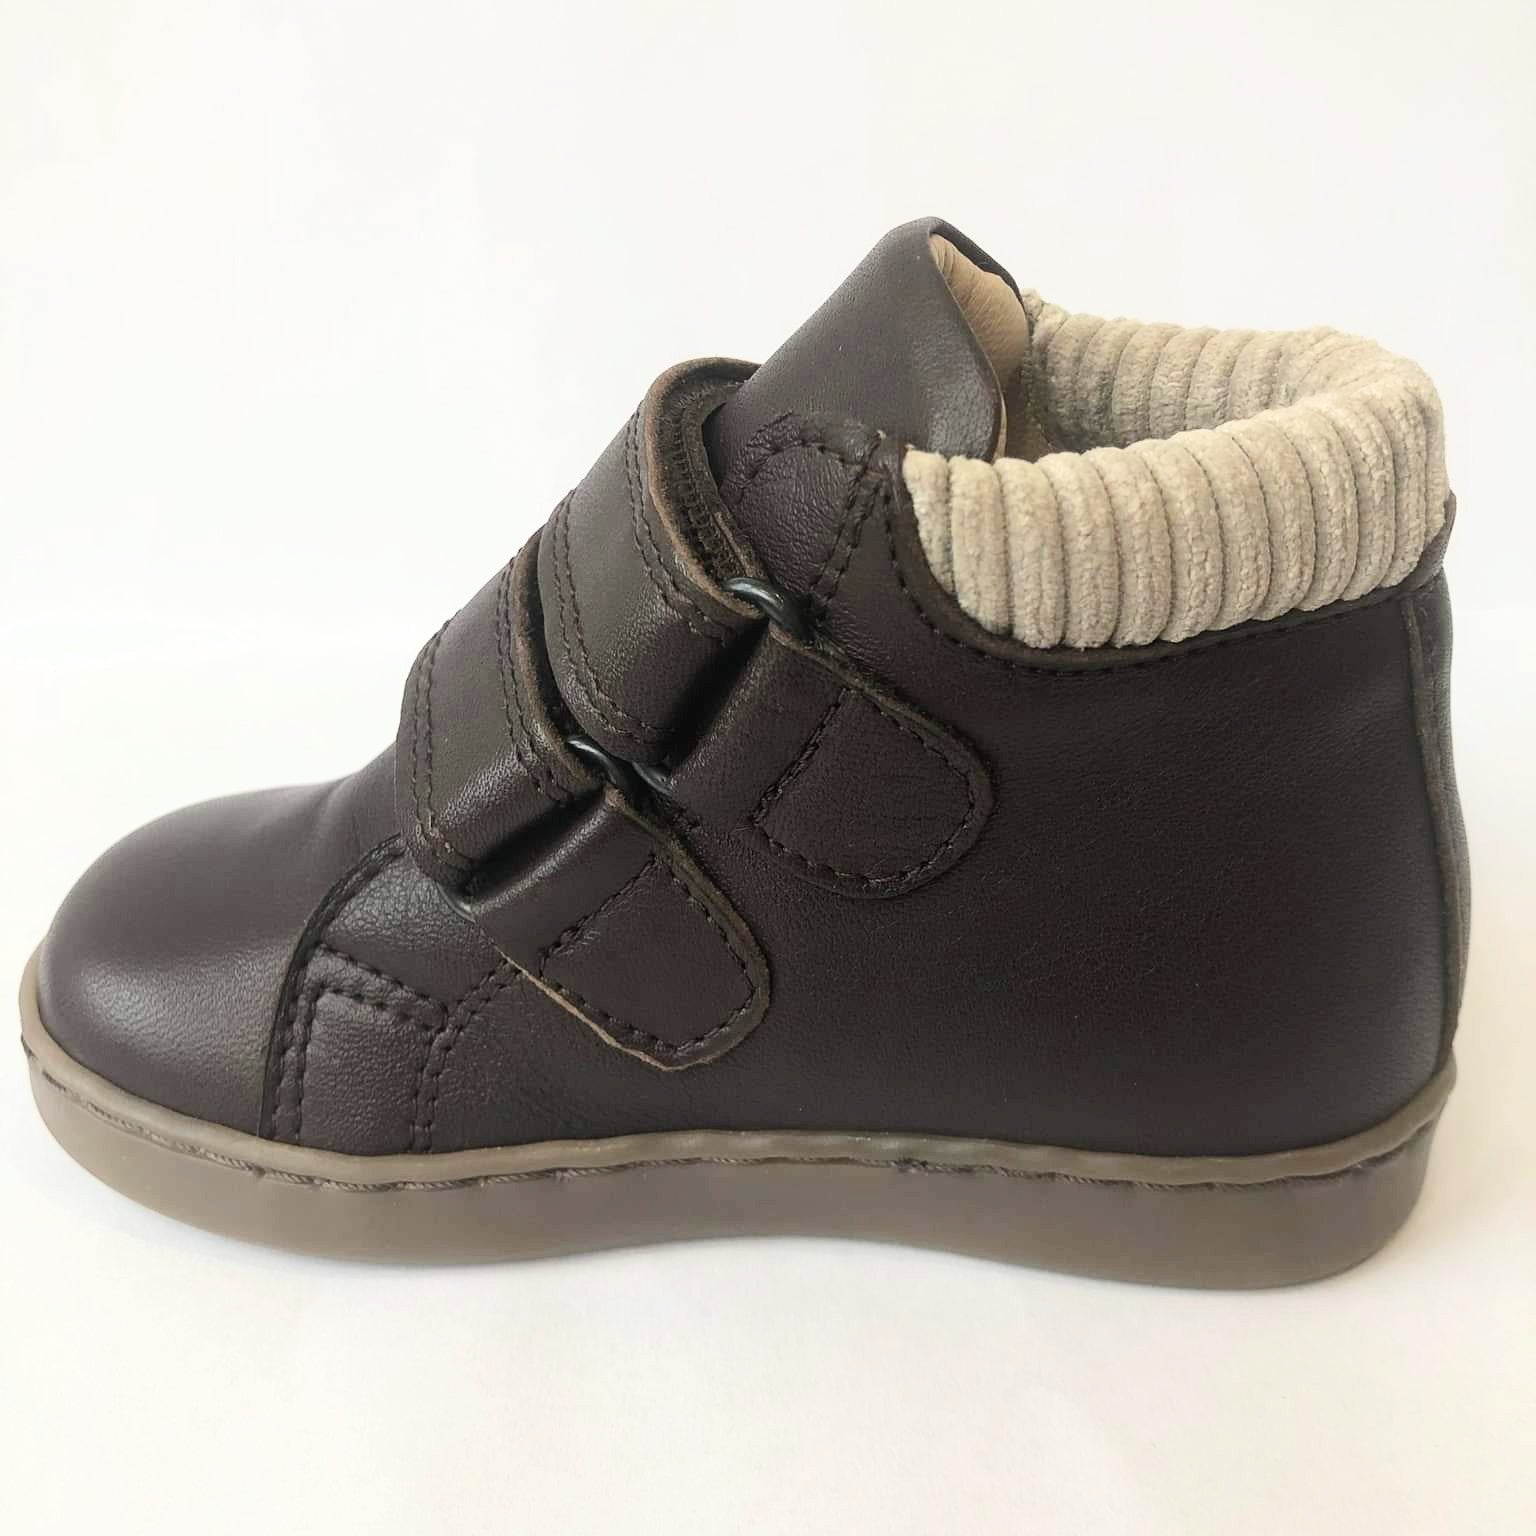 A boys ankle boot by Petasil, style Grange, in Brown leather with double velcro fastening. Left side view.